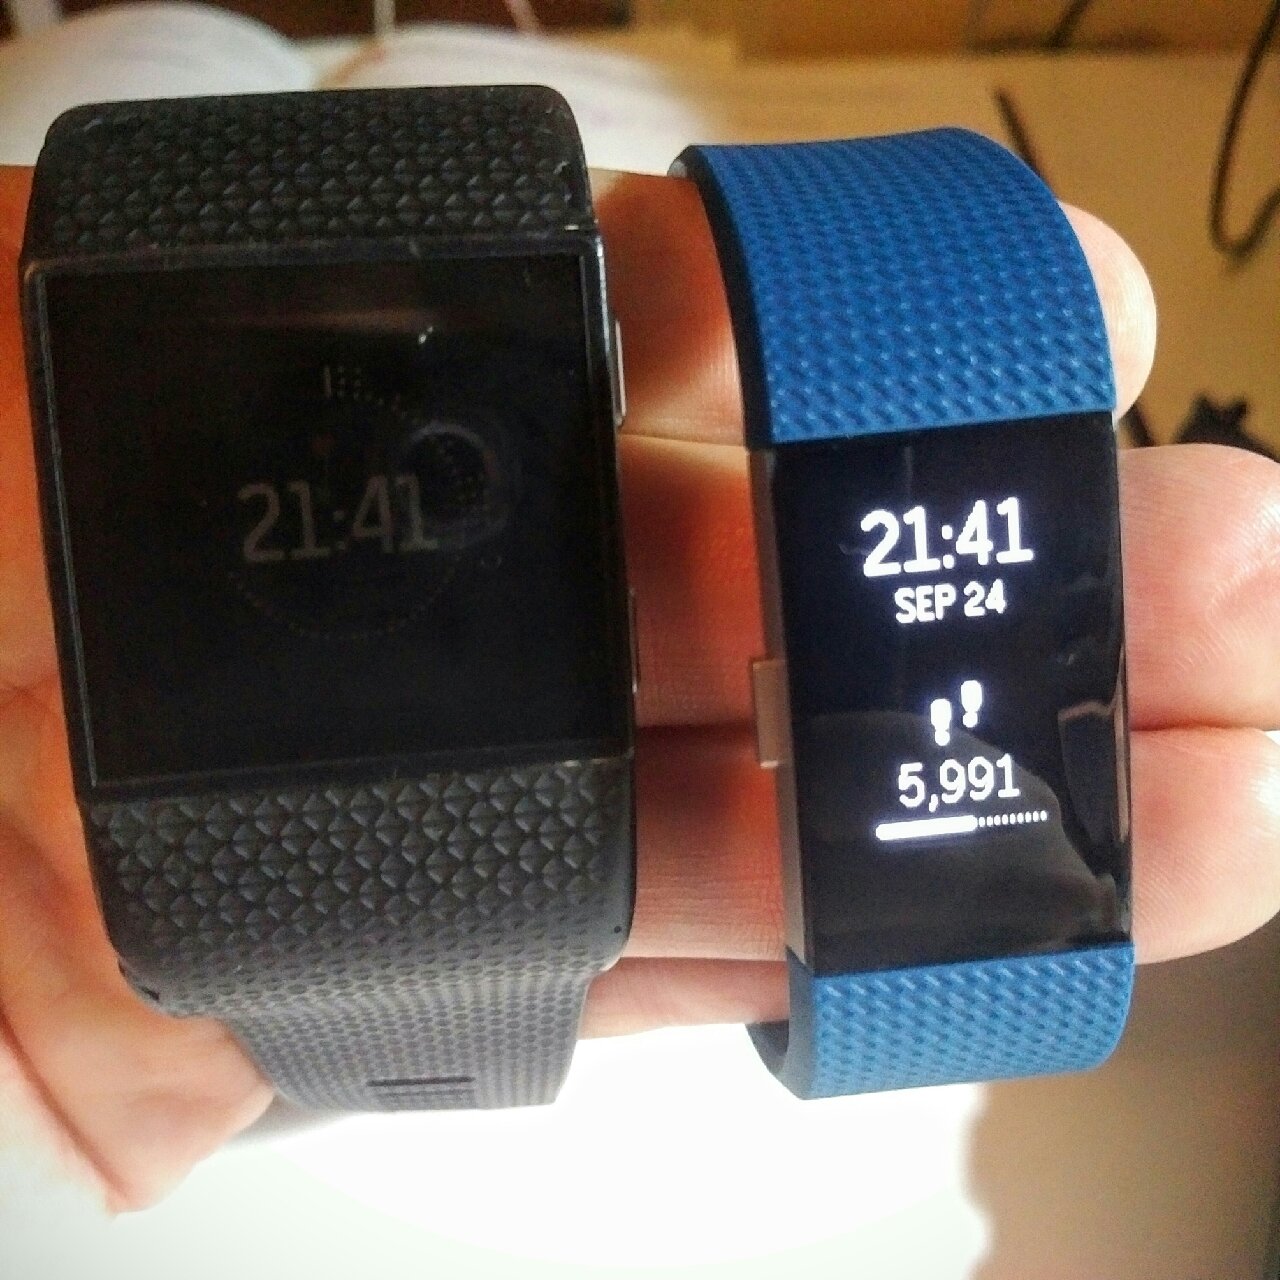 fitbit surge vs charge 2